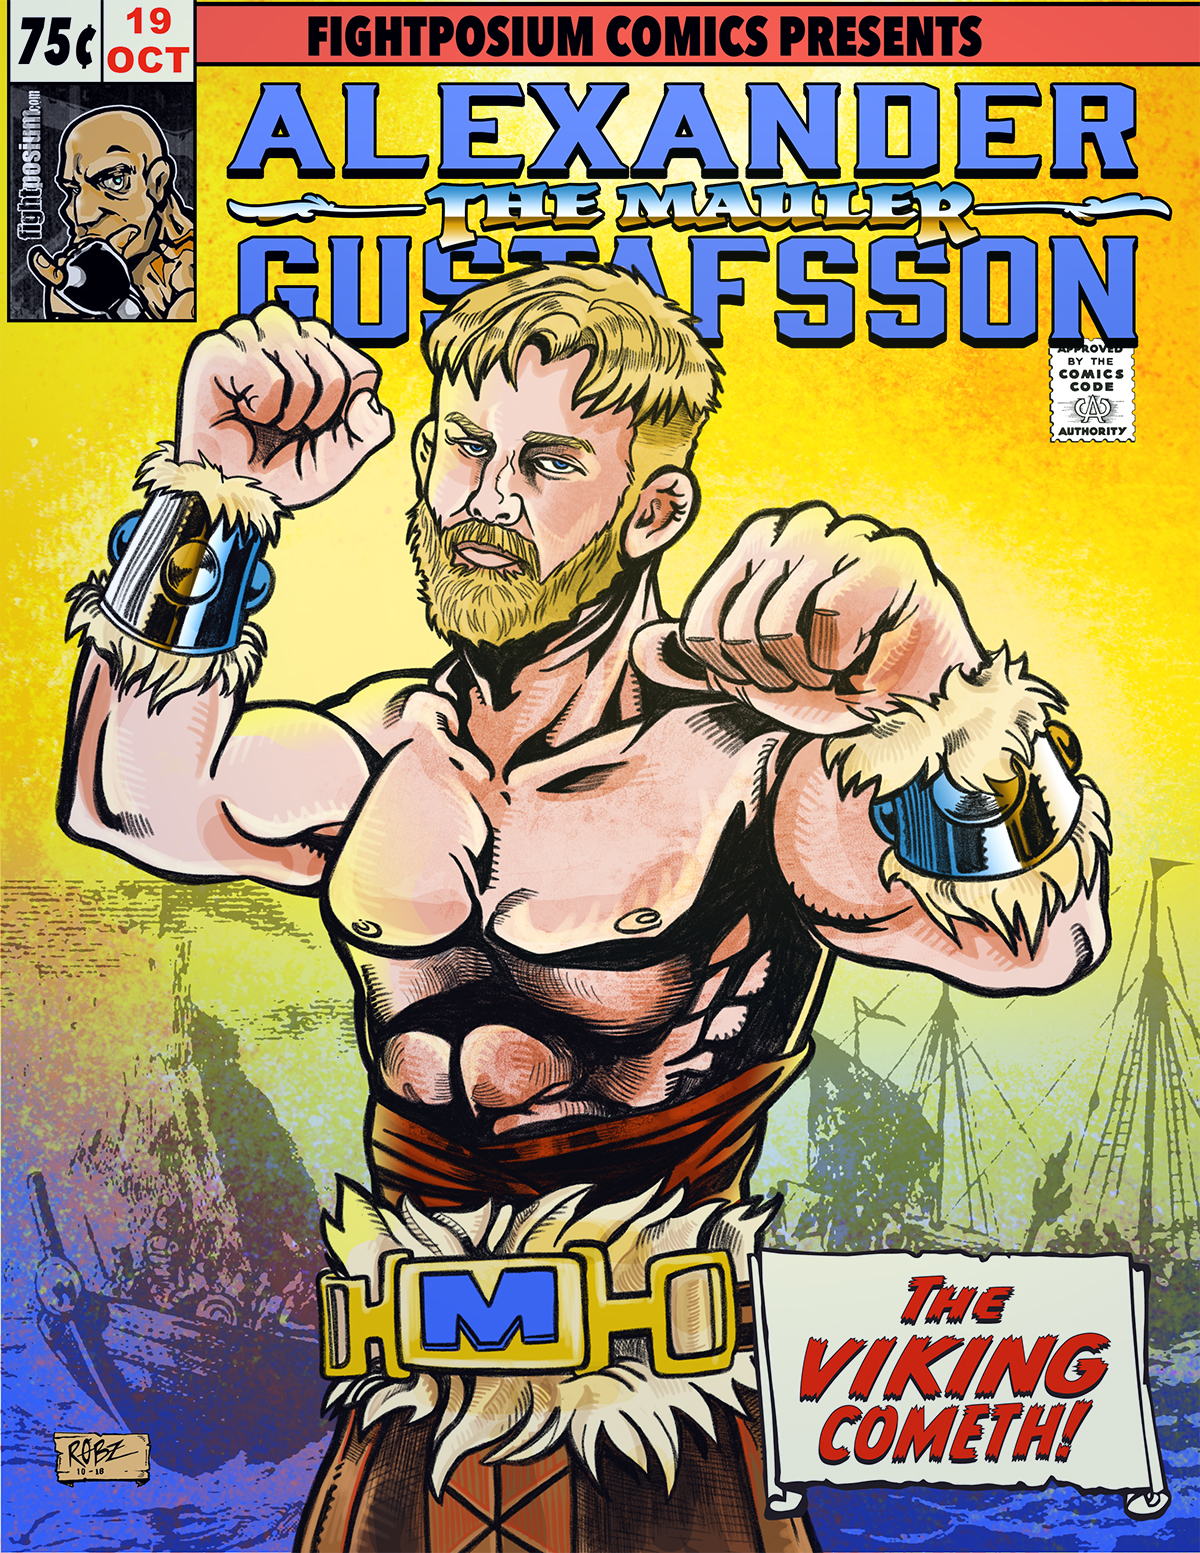 You are currently viewing Alexander “The Mauler” Gustafsson – The Viking Cometh!!